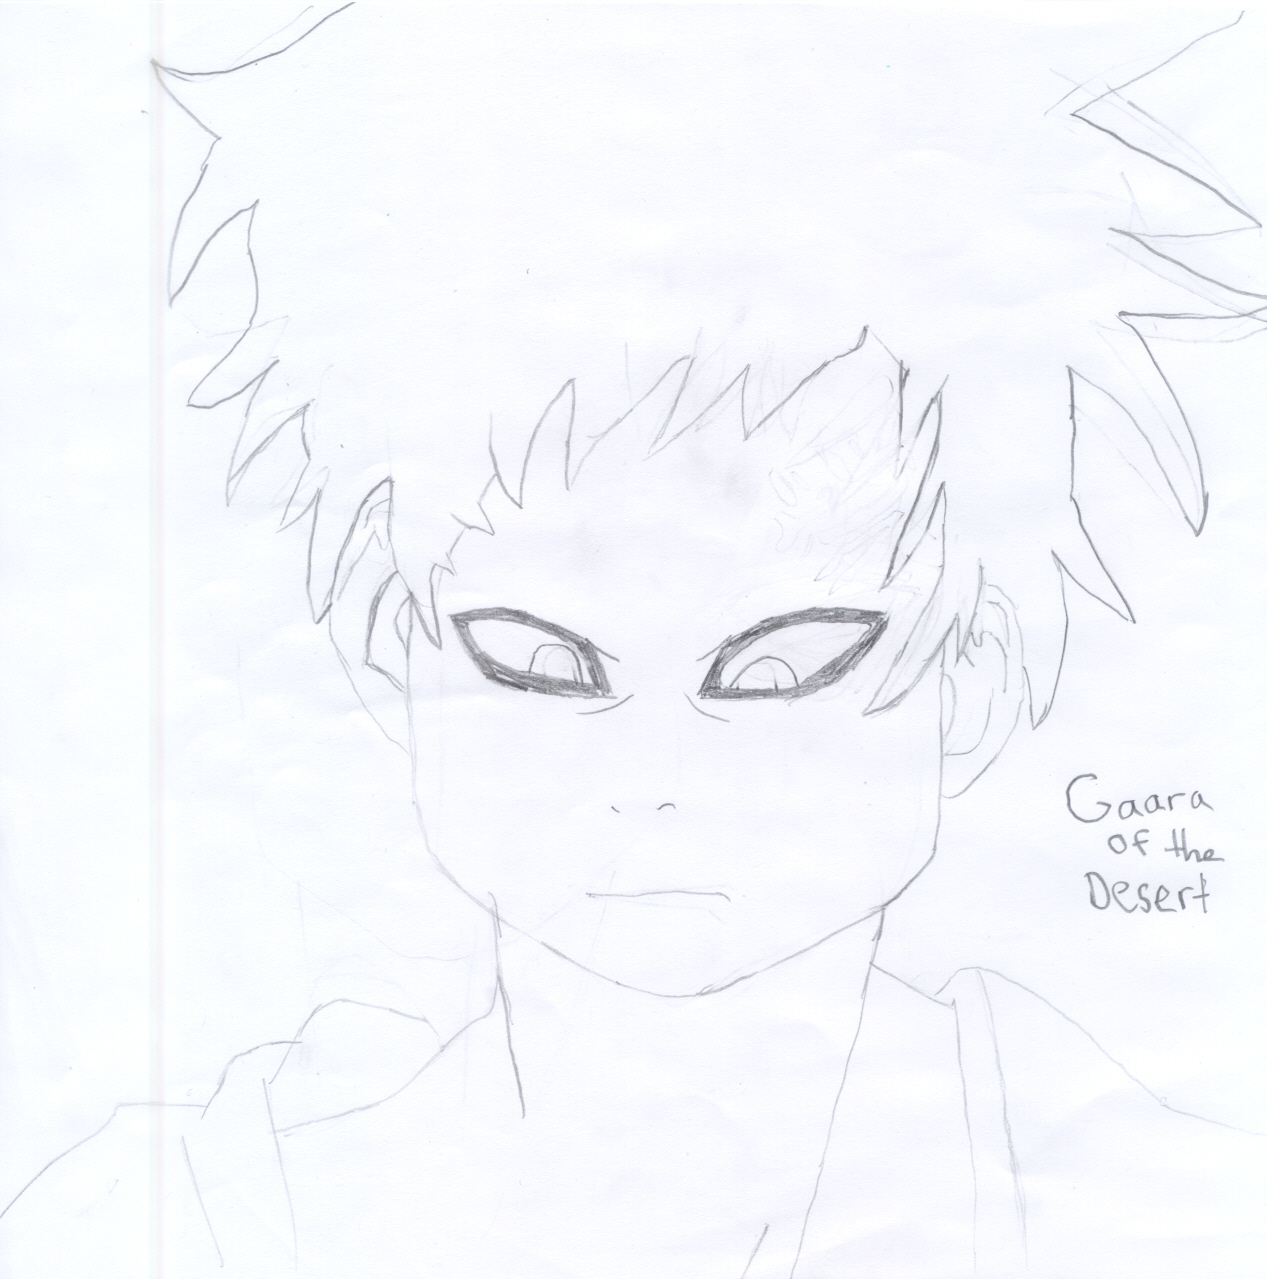 Gaara of the Desert by Mephisto_lord_of_hatred